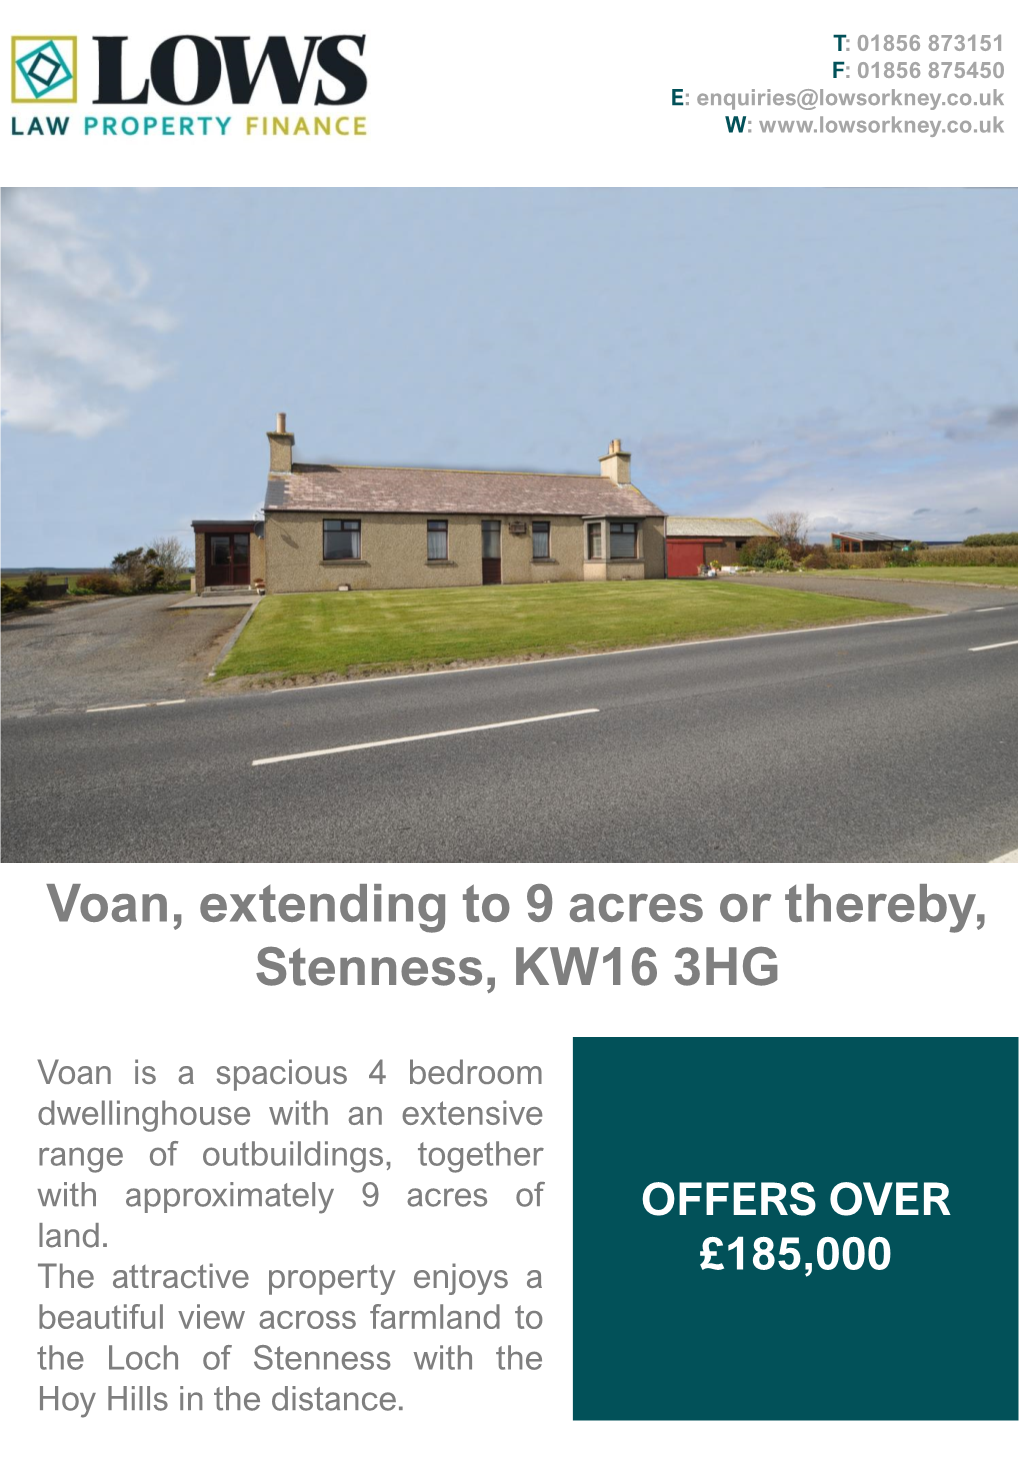 Voan, Extending to 9 Acres Or Thereby, Stenness, KW16 3HG